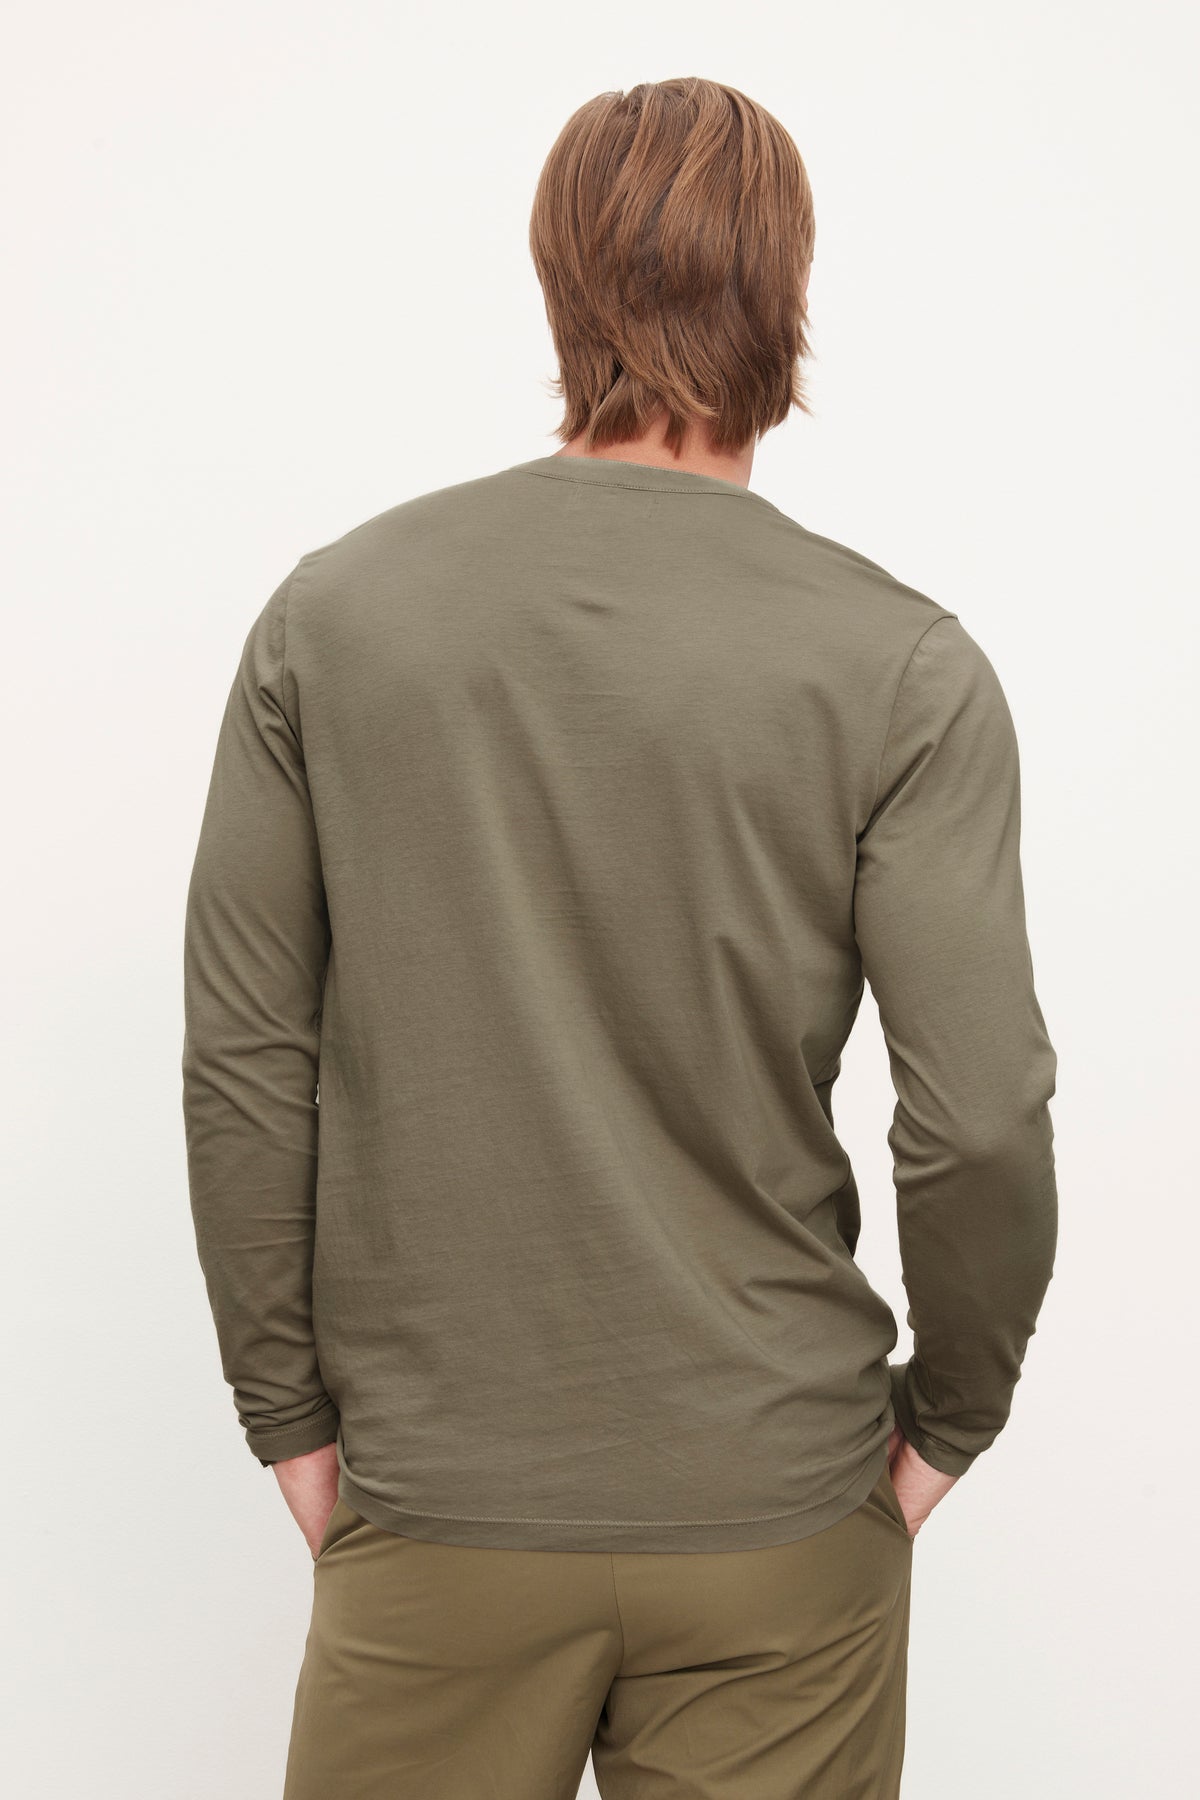   Man in olive green Velvet by Graham & Spencer ALVARO COTTON JERSEY HENLEY shirt and trousers, viewed from the back, standing against a white background. 